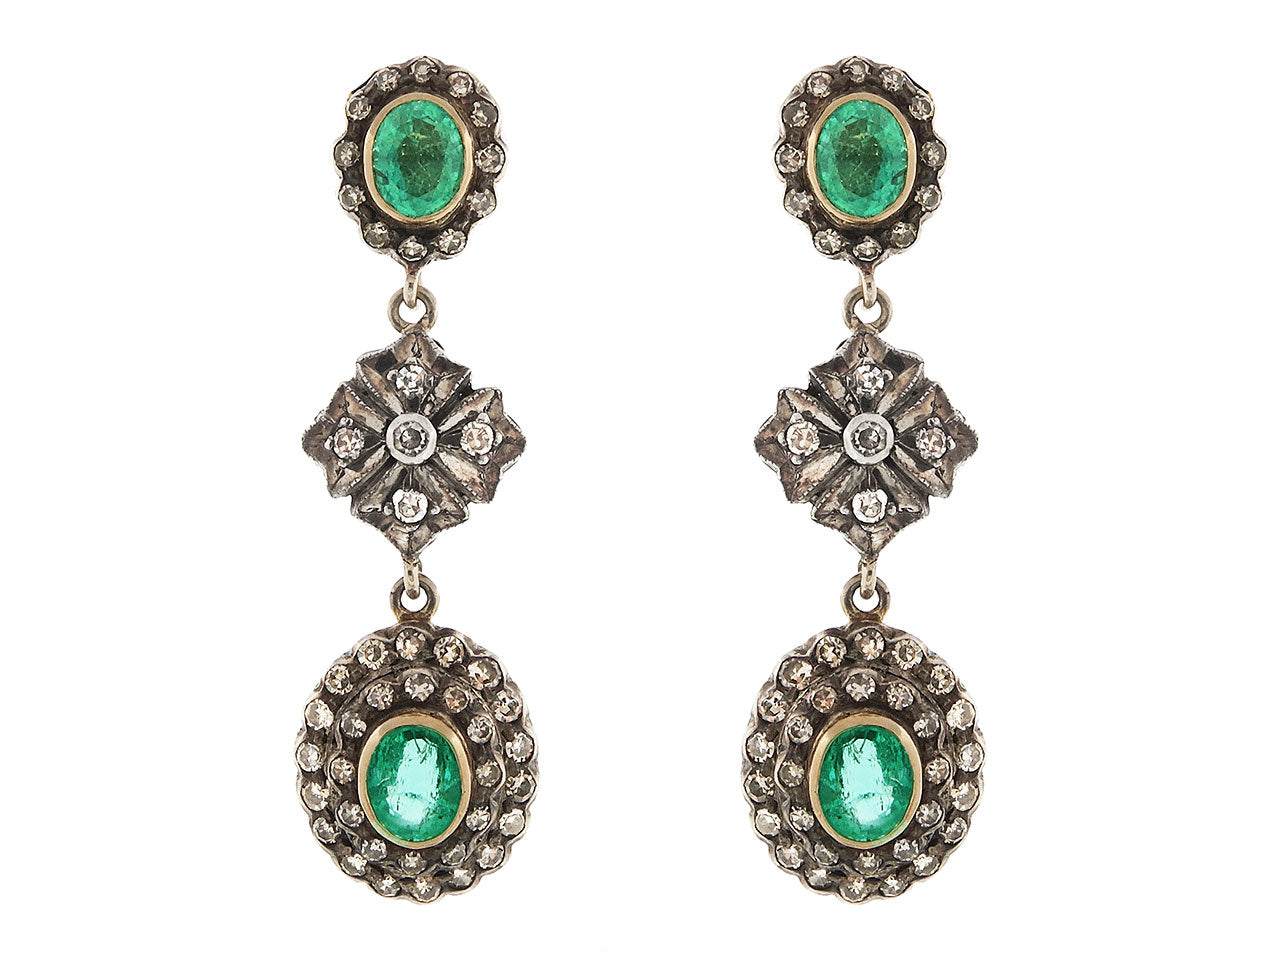 Emerald and Diamond Earrings in Silver over 18K Gold